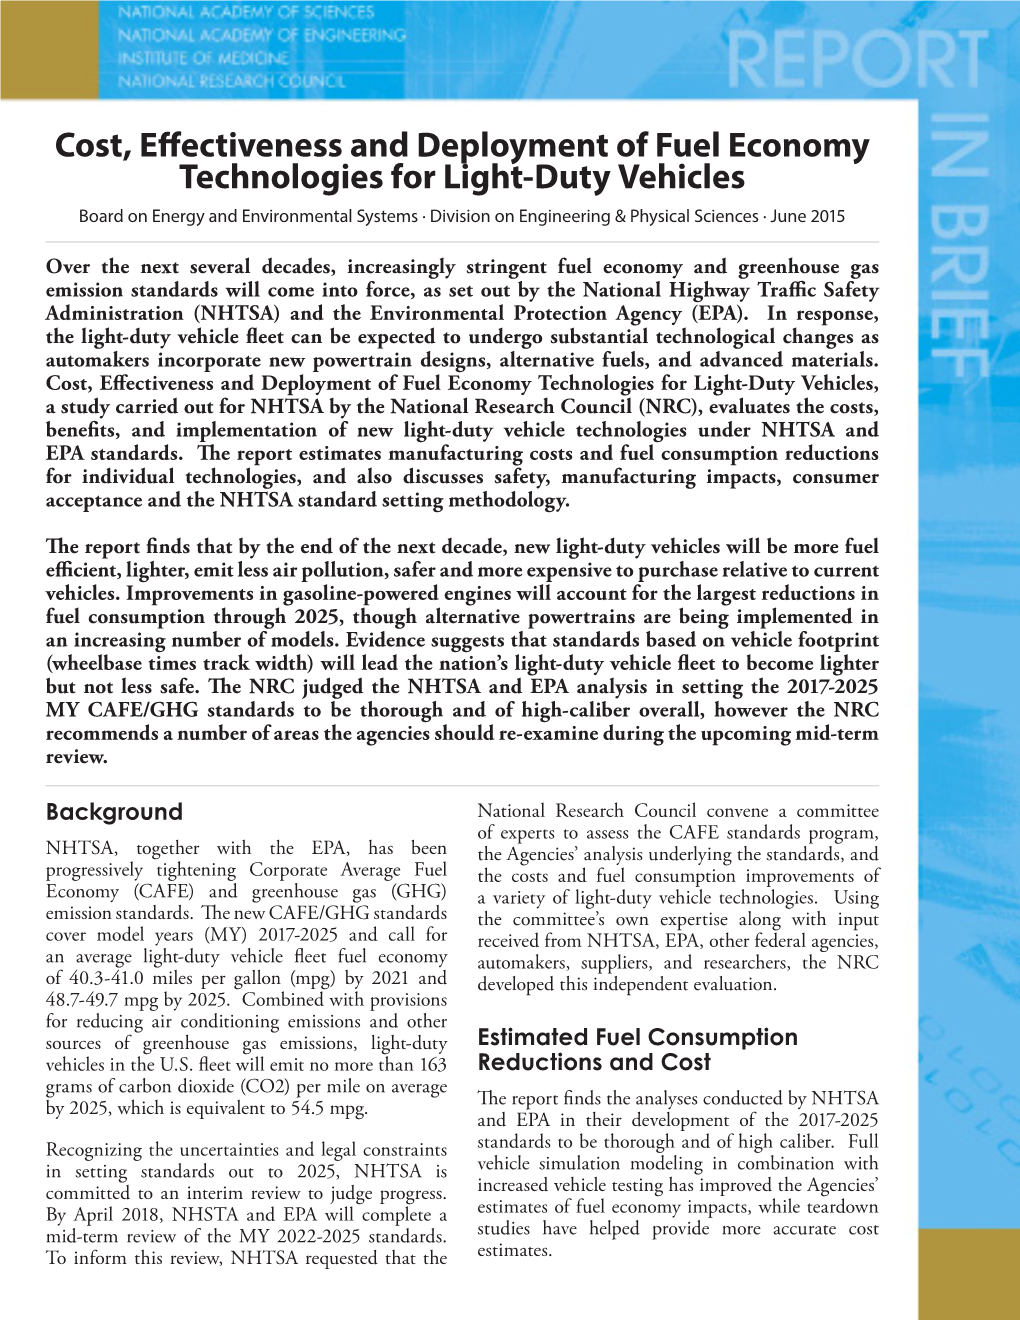 Cost, Effectiveness and Deployment of Fuel Economy Technologies for Light-Duty Vehicles